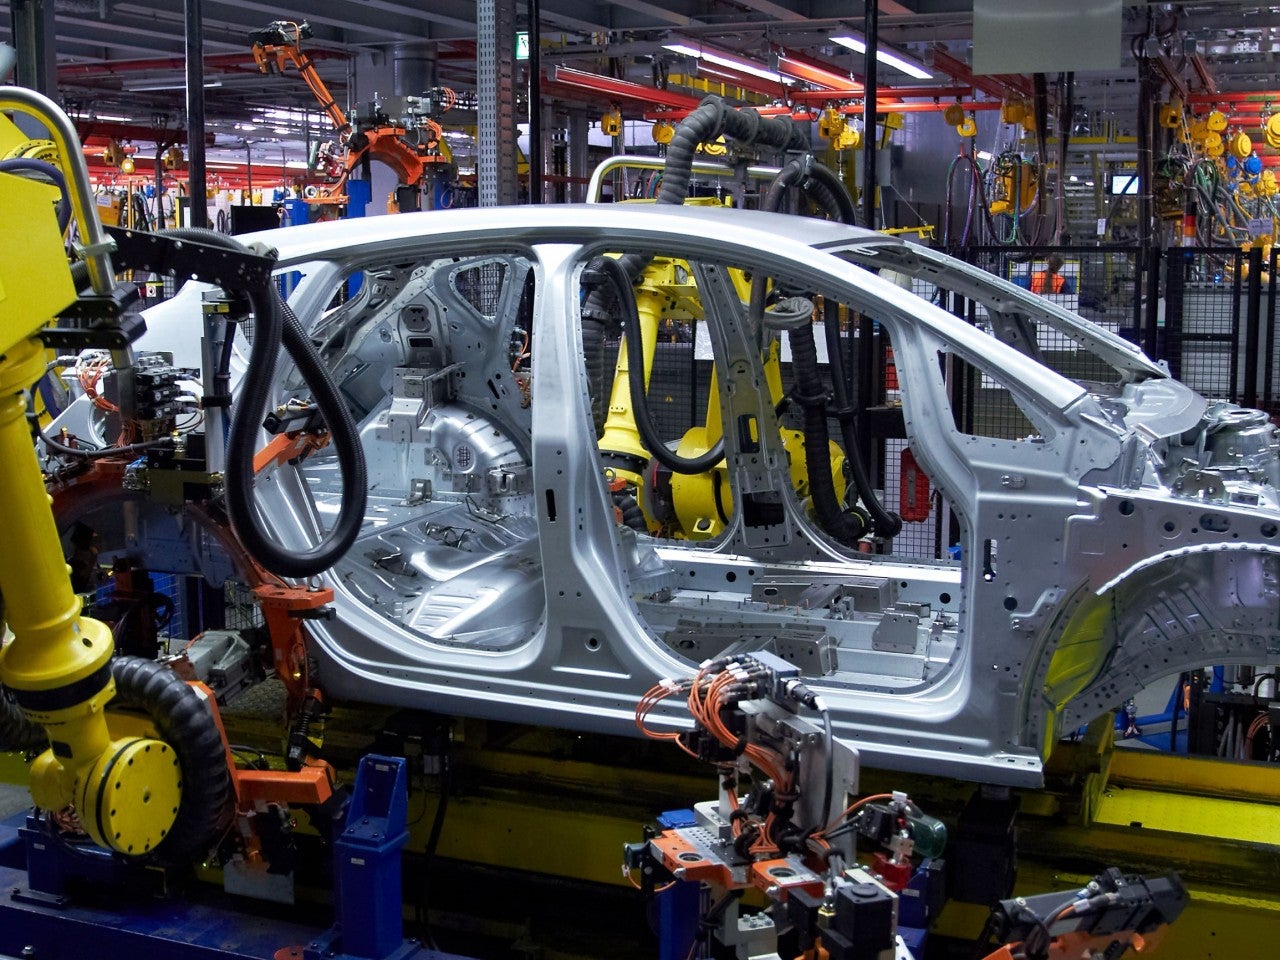 Learn how digital transformation can help automotive manufacturers manage operational risk across the supply chain